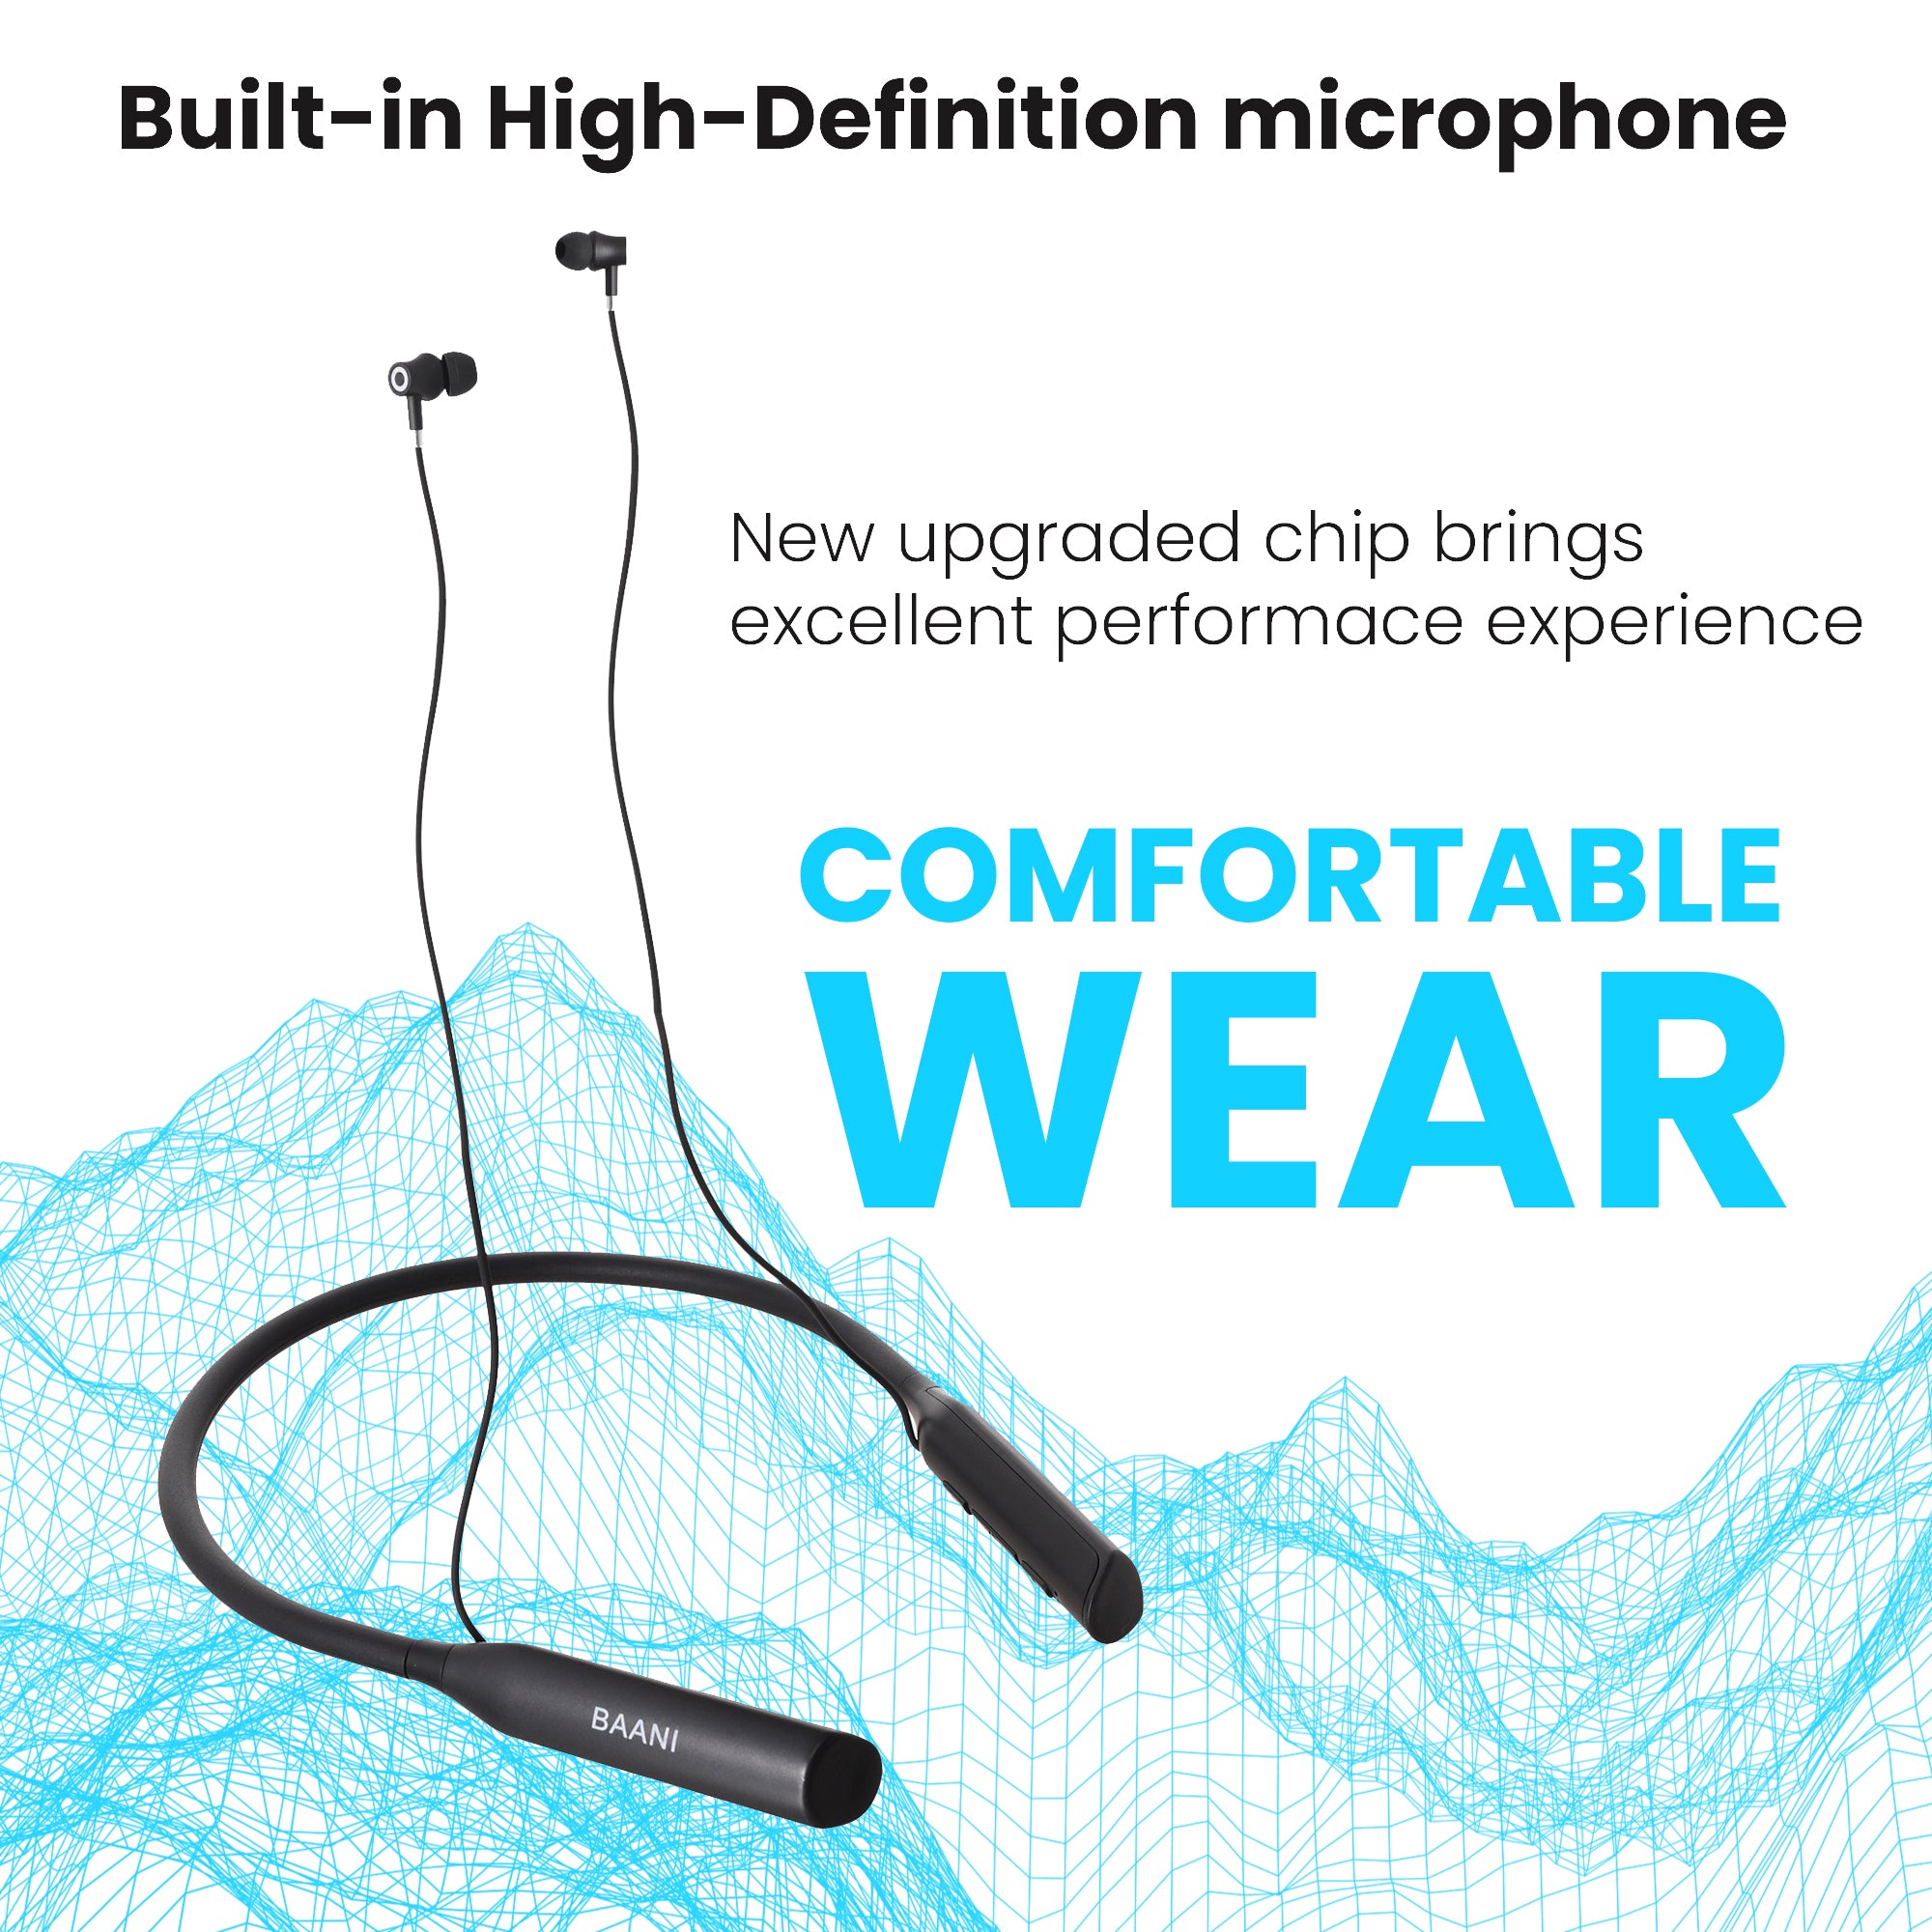 High Definition Microphone feature of Baani BN 206 Pro